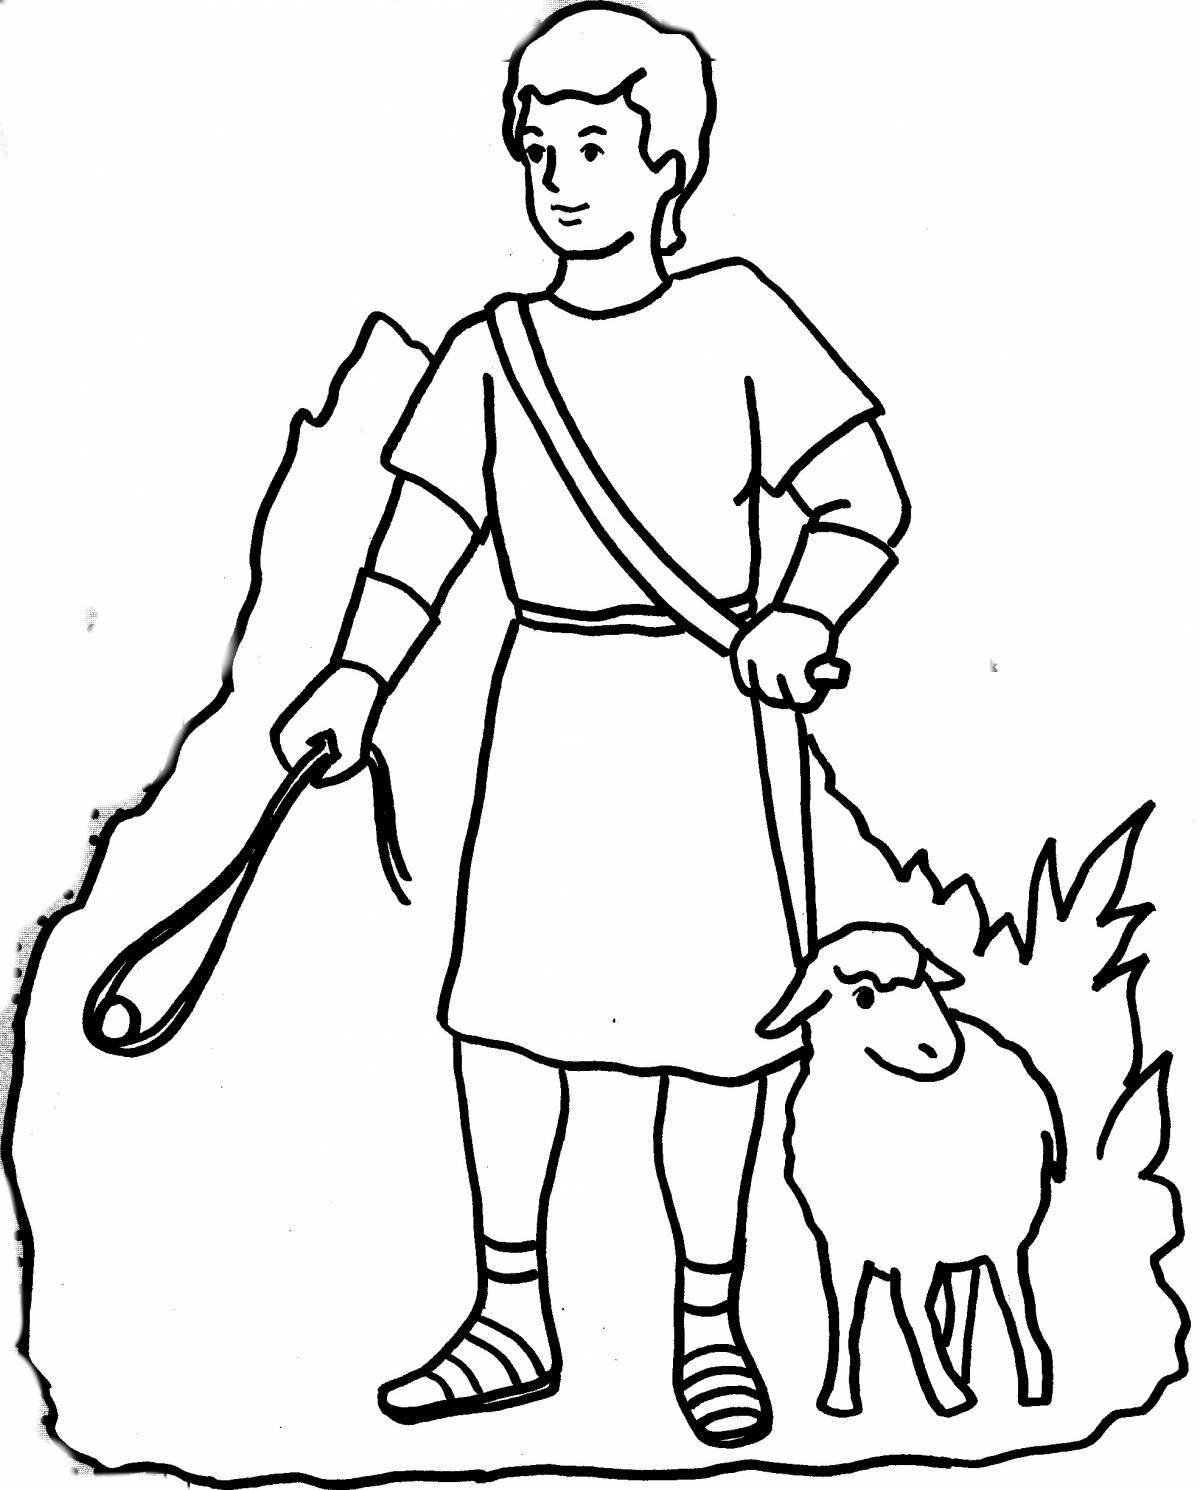 Coloring page charming shepherd